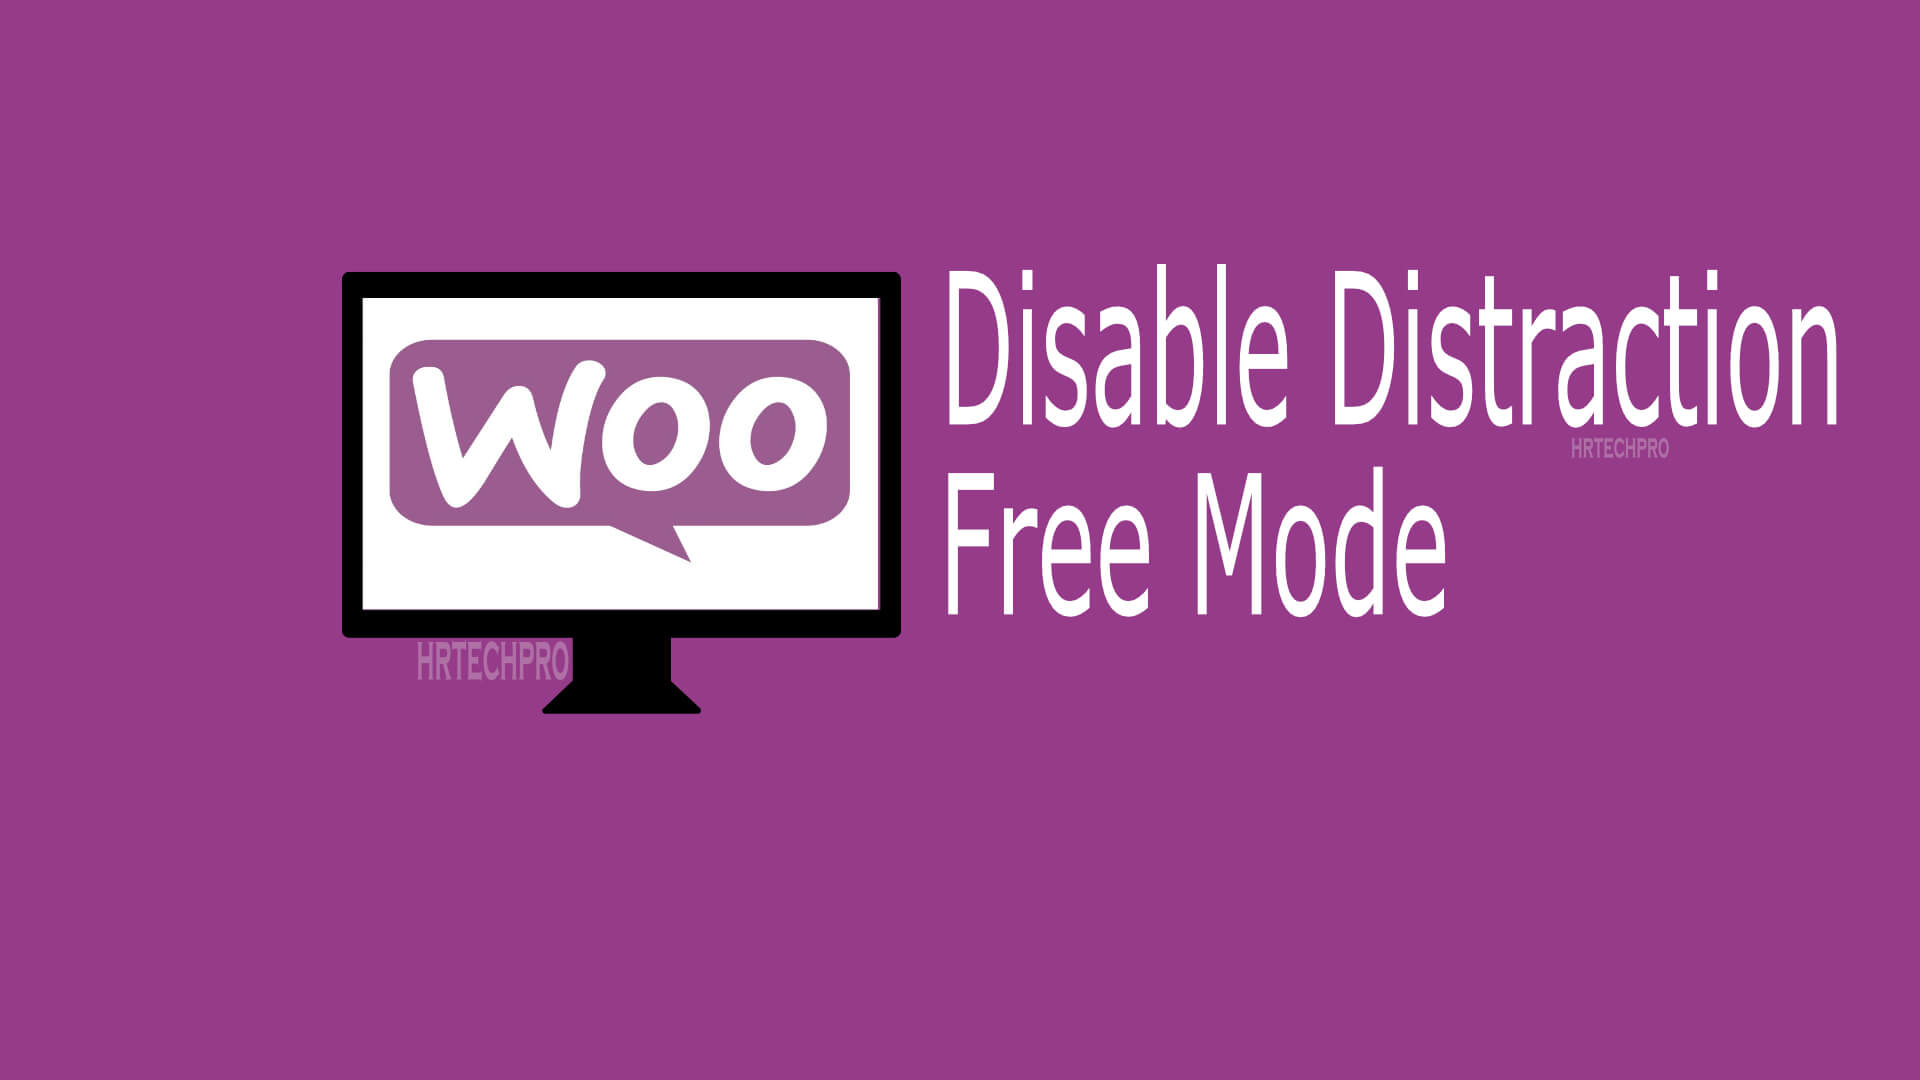 How to Disable Distraction free mode Woocommerce